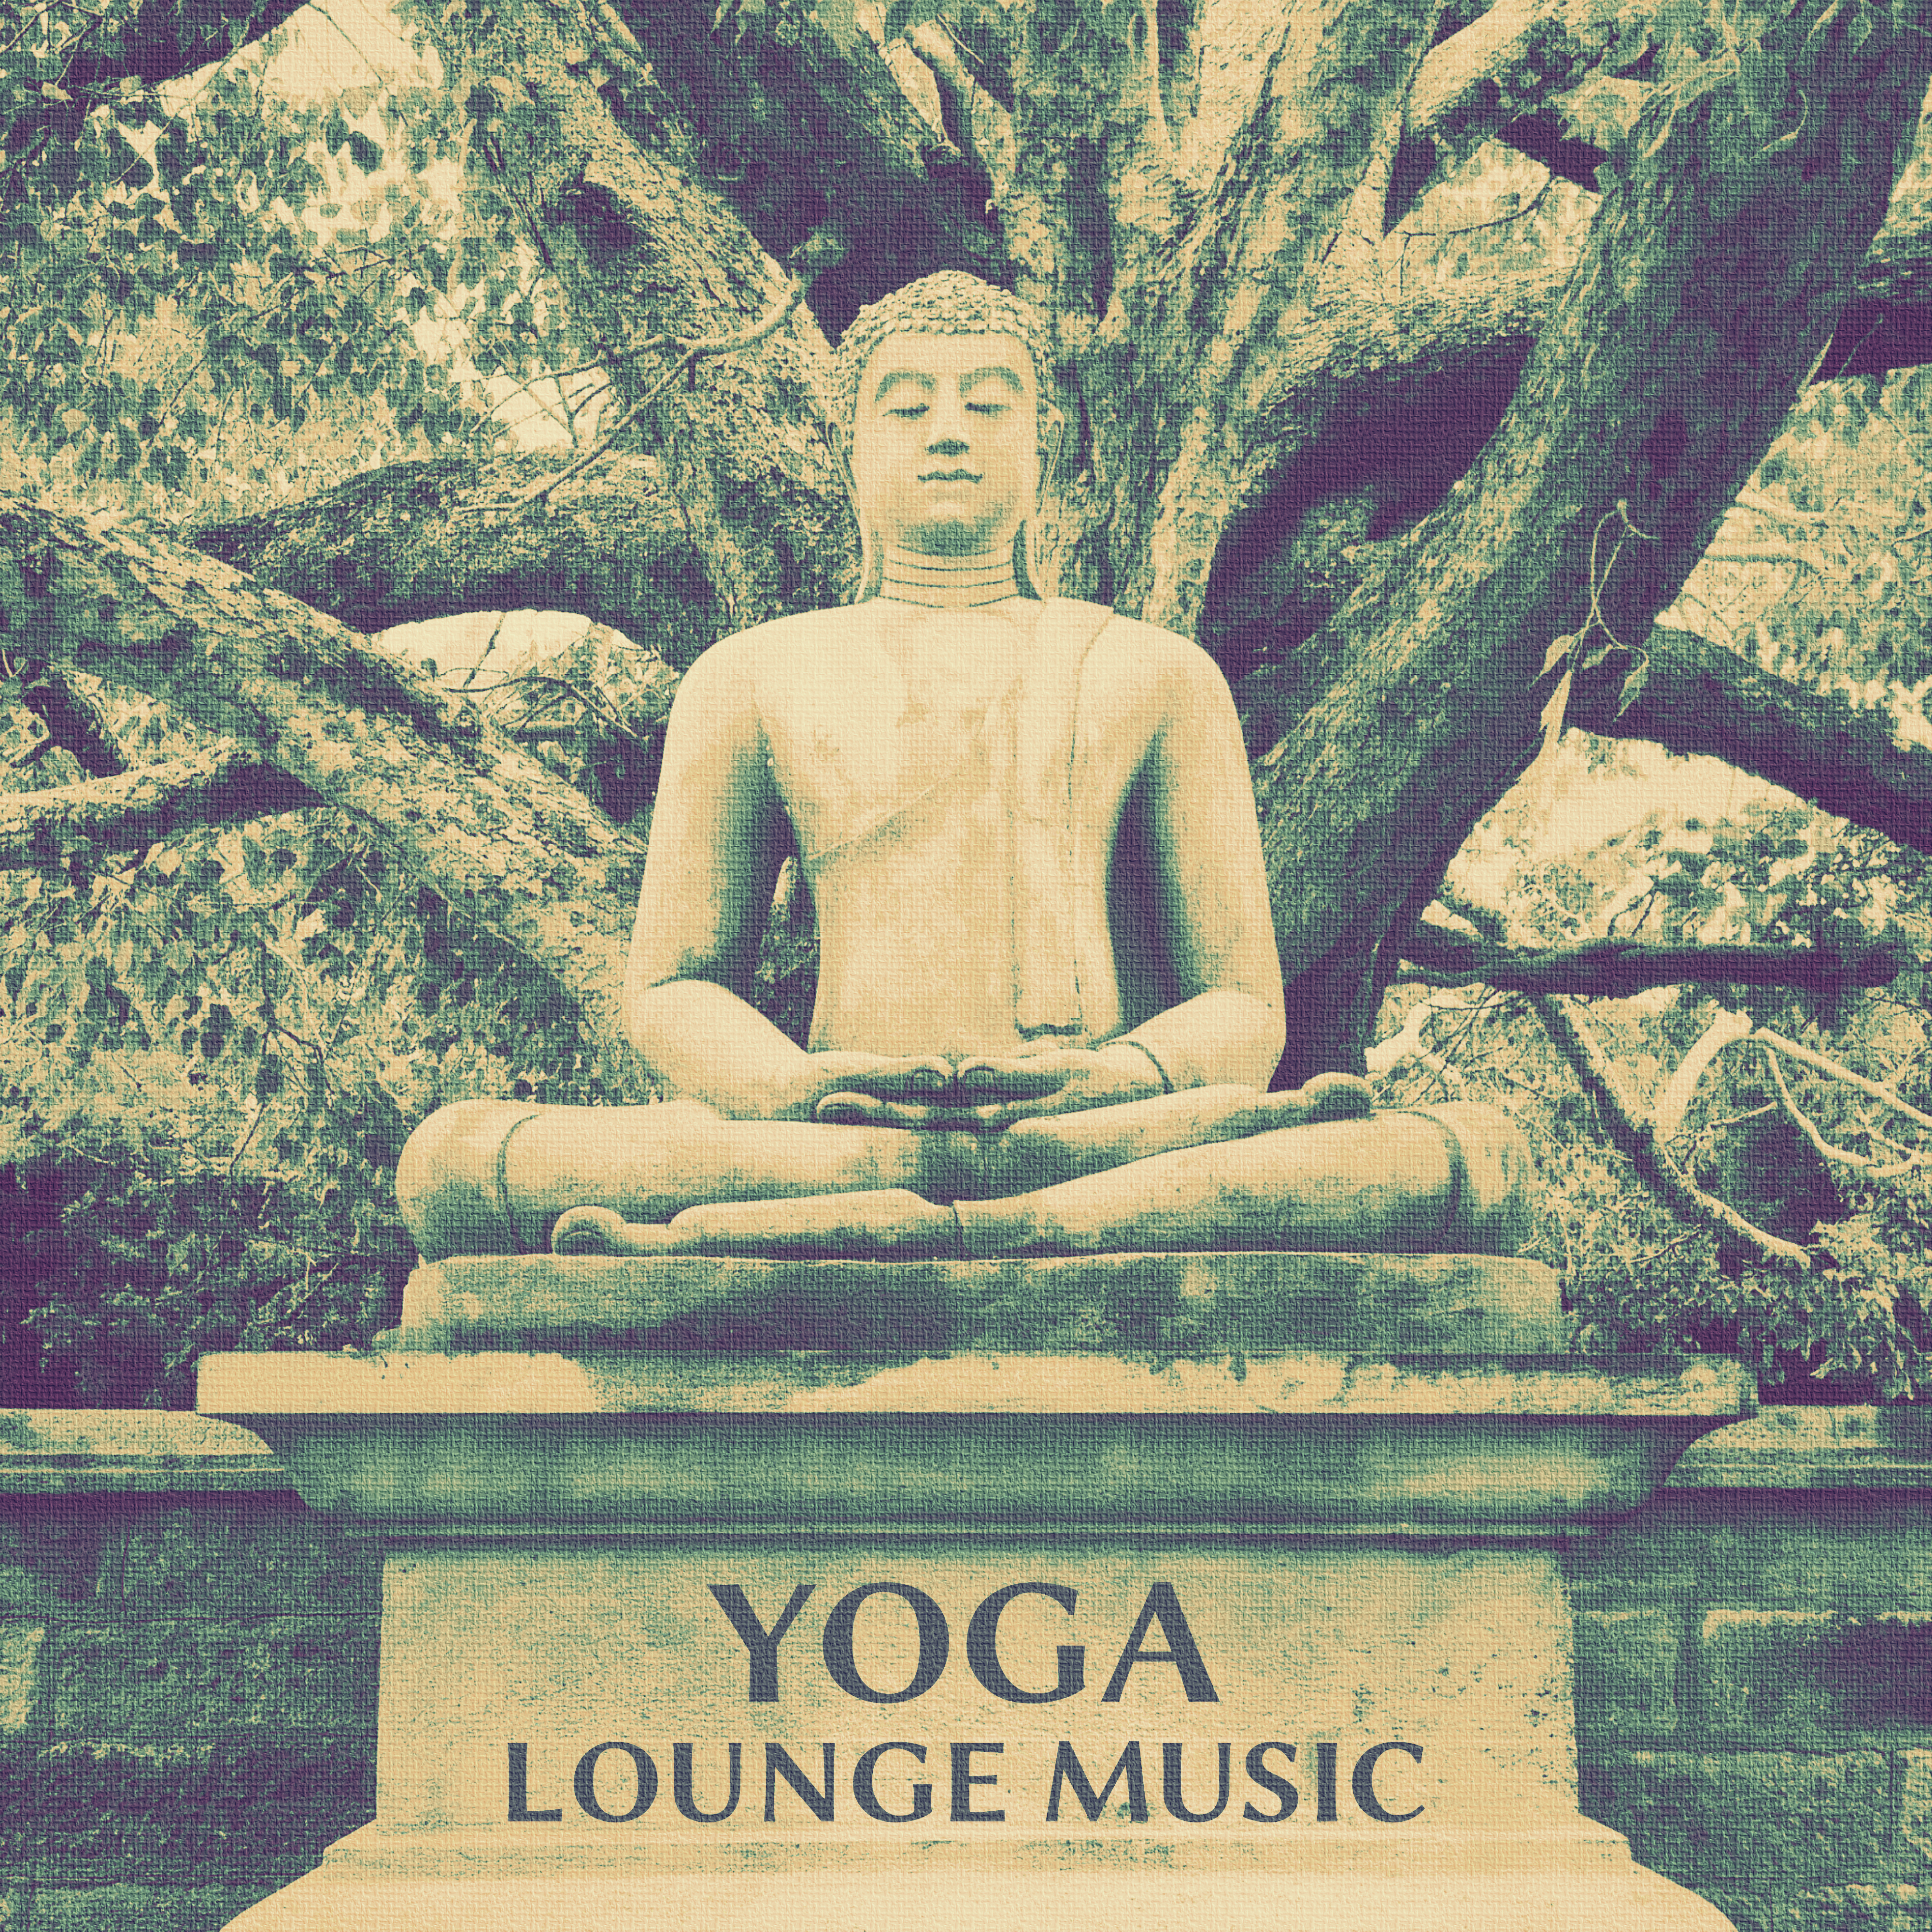 Yoga Lounge Music – Calming Sounds of New Age Music for Pure Mediatation, Mindfulness Training, Pure Relax and Feel Inner Energy